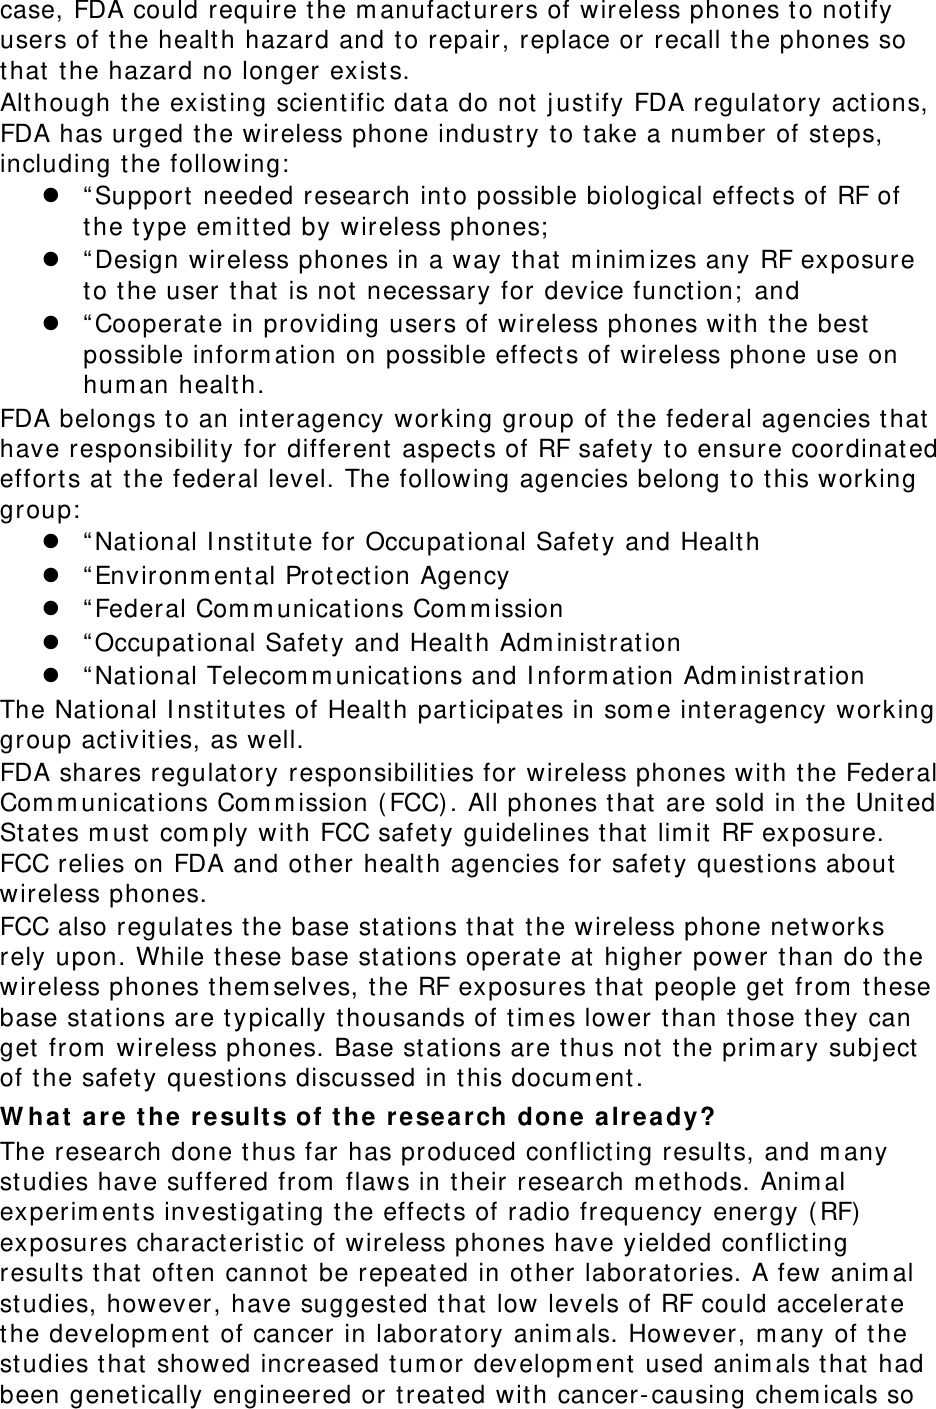 case, FDA could require the m anufact urers of wireless phones to notify users of the health hazard and t o repair, replace or recall t he phones so that t he hazard no longer exists. Alt hough the existing scient ific data do not j ust ify FDA regulat ory act ions, FDA has urged t he wireless phone indust ry t o t ake a num ber of st eps, including t he following:  z “ Support  needed research into possible biological effect s of RF of the type em itted by wireless phones;  z “ Design wireless phones in a way that m inim izes any RF exposure to the user that is not necessary for device funct ion;  and z “ Cooperate in providing users of wireless phones with t he best  possible inform ation on possible effect s of wireless phone use on hum an healt h. FDA belongs to an int eragency working group of t he federal agencies that have responsibilit y for different  aspect s of RF safet y to ensure coordinated efforts at the federal level. The following agencies belong to this working group:  z “ National I nst itut e for Occupat ional Safety and Healt h z “ Environm ent al Protect ion Agency z “ Federal Com m unicat ions Com m ission z “ Occupat ional Safet y and Health Adm inist ration z “ National Telecom m unications and I nform ation Adm inist ration The National I nst itut es of Health part icipat es in som e interagency working group act ivities, as well. FDA shares regulat ory responsibilities for wireless phones with t he Federal Com m unications Com m ission ( FCC) . All phones t hat are sold in t he United St ates m ust com ply with FCC safet y guidelines t hat lim it RF exposure. FCC relies on FDA and other health agencies for safet y quest ions about wireless phones. FCC also regulat es the base stat ions t hat  the wireless phone networks rely upon. While t hese base st at ions operat e at higher power than do the wireless phones them selves, t he RF exposures that people get  from  t hese base stat ions are typically t housands of tim es lower t han t hose they can get  from  wireless phones. Base st ations are t hus not the prim ary subj ect of t he safety quest ions discussed in this docum ent . W ha t  a r e t he  result s of the  resear ch done a lr eady? The research done thus far has produced conflict ing result s, and m any studies have suffered from  flaws in t heir research m et hods. Anim al experim ent s invest igating the effect s of radio frequency energy ( RF)  exposures charact eristic of wireless phones have yielded conflict ing results t hat often cannot  be repeated in ot her laborat ories. A few anim al studies, however, have suggest ed t hat  low levels of RF could accelerate the developm ent of cancer in laborat ory anim als. However, m any of the studies t hat showed increased tum or developm ent used anim als that had been genet ically engineered or t reat ed with cancer- causing chem icals so 